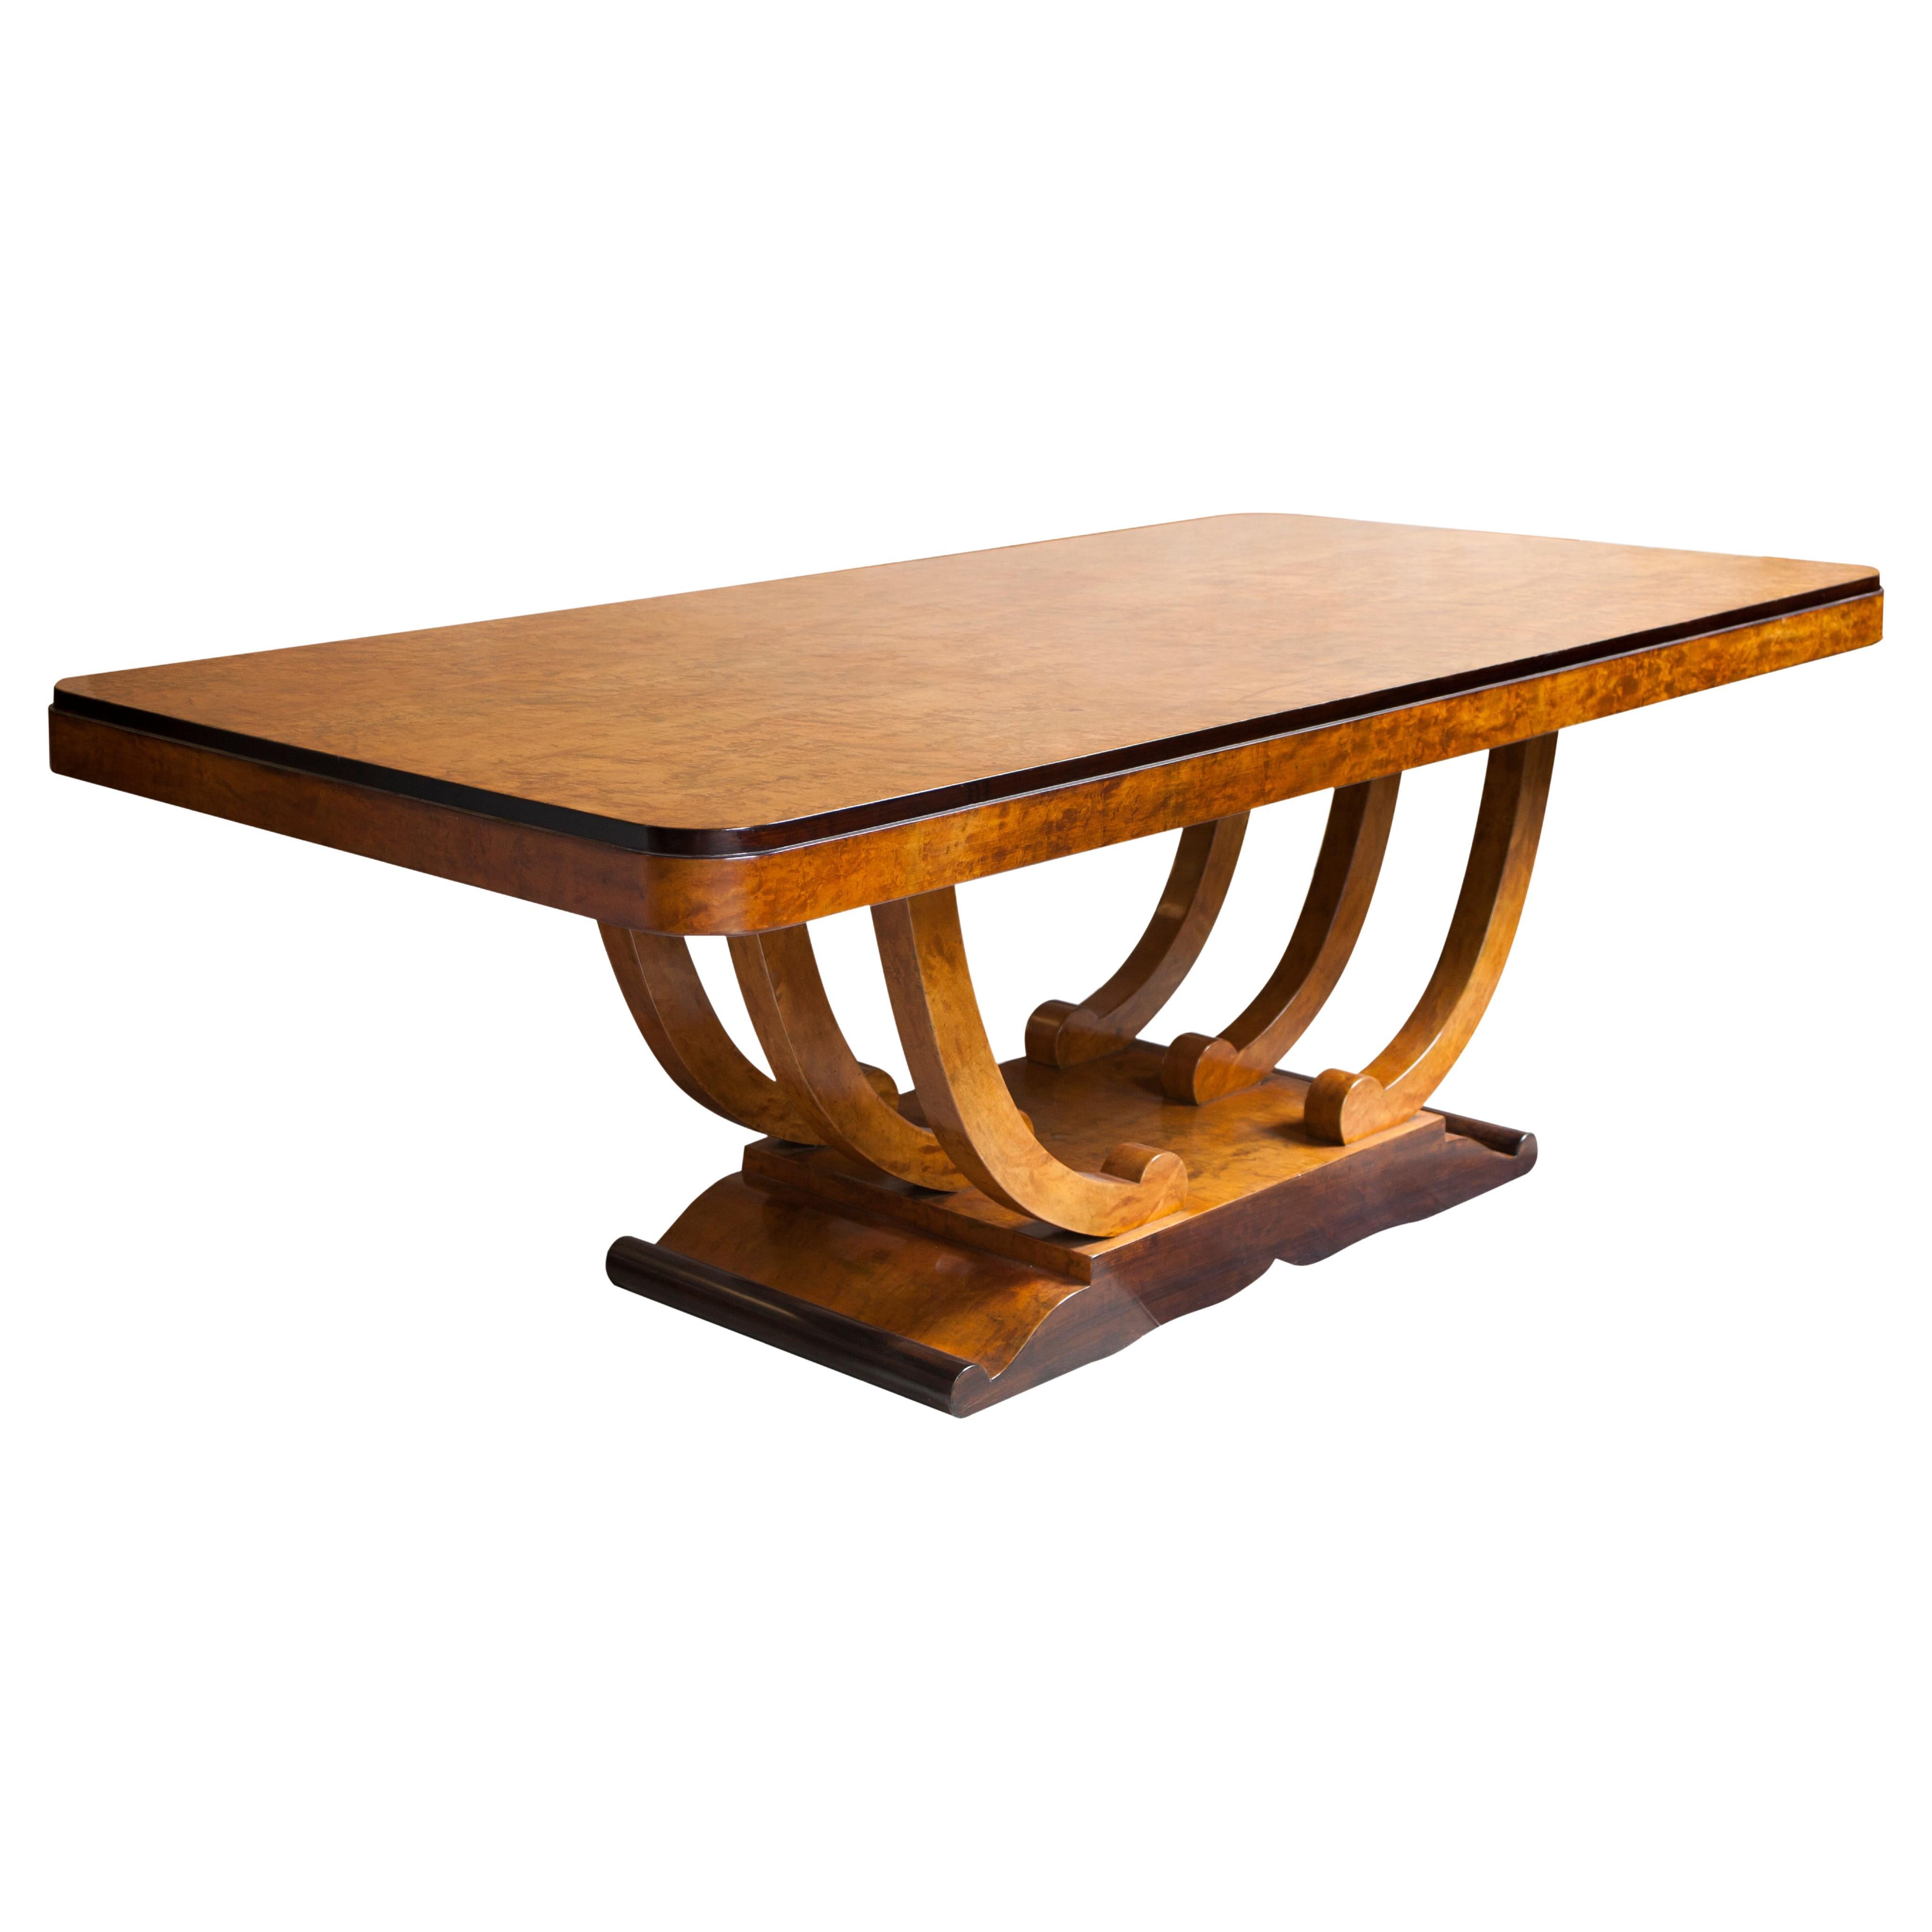 Dining Room Table, Style: Art Deco, 1920 '8 People', Material: Wood